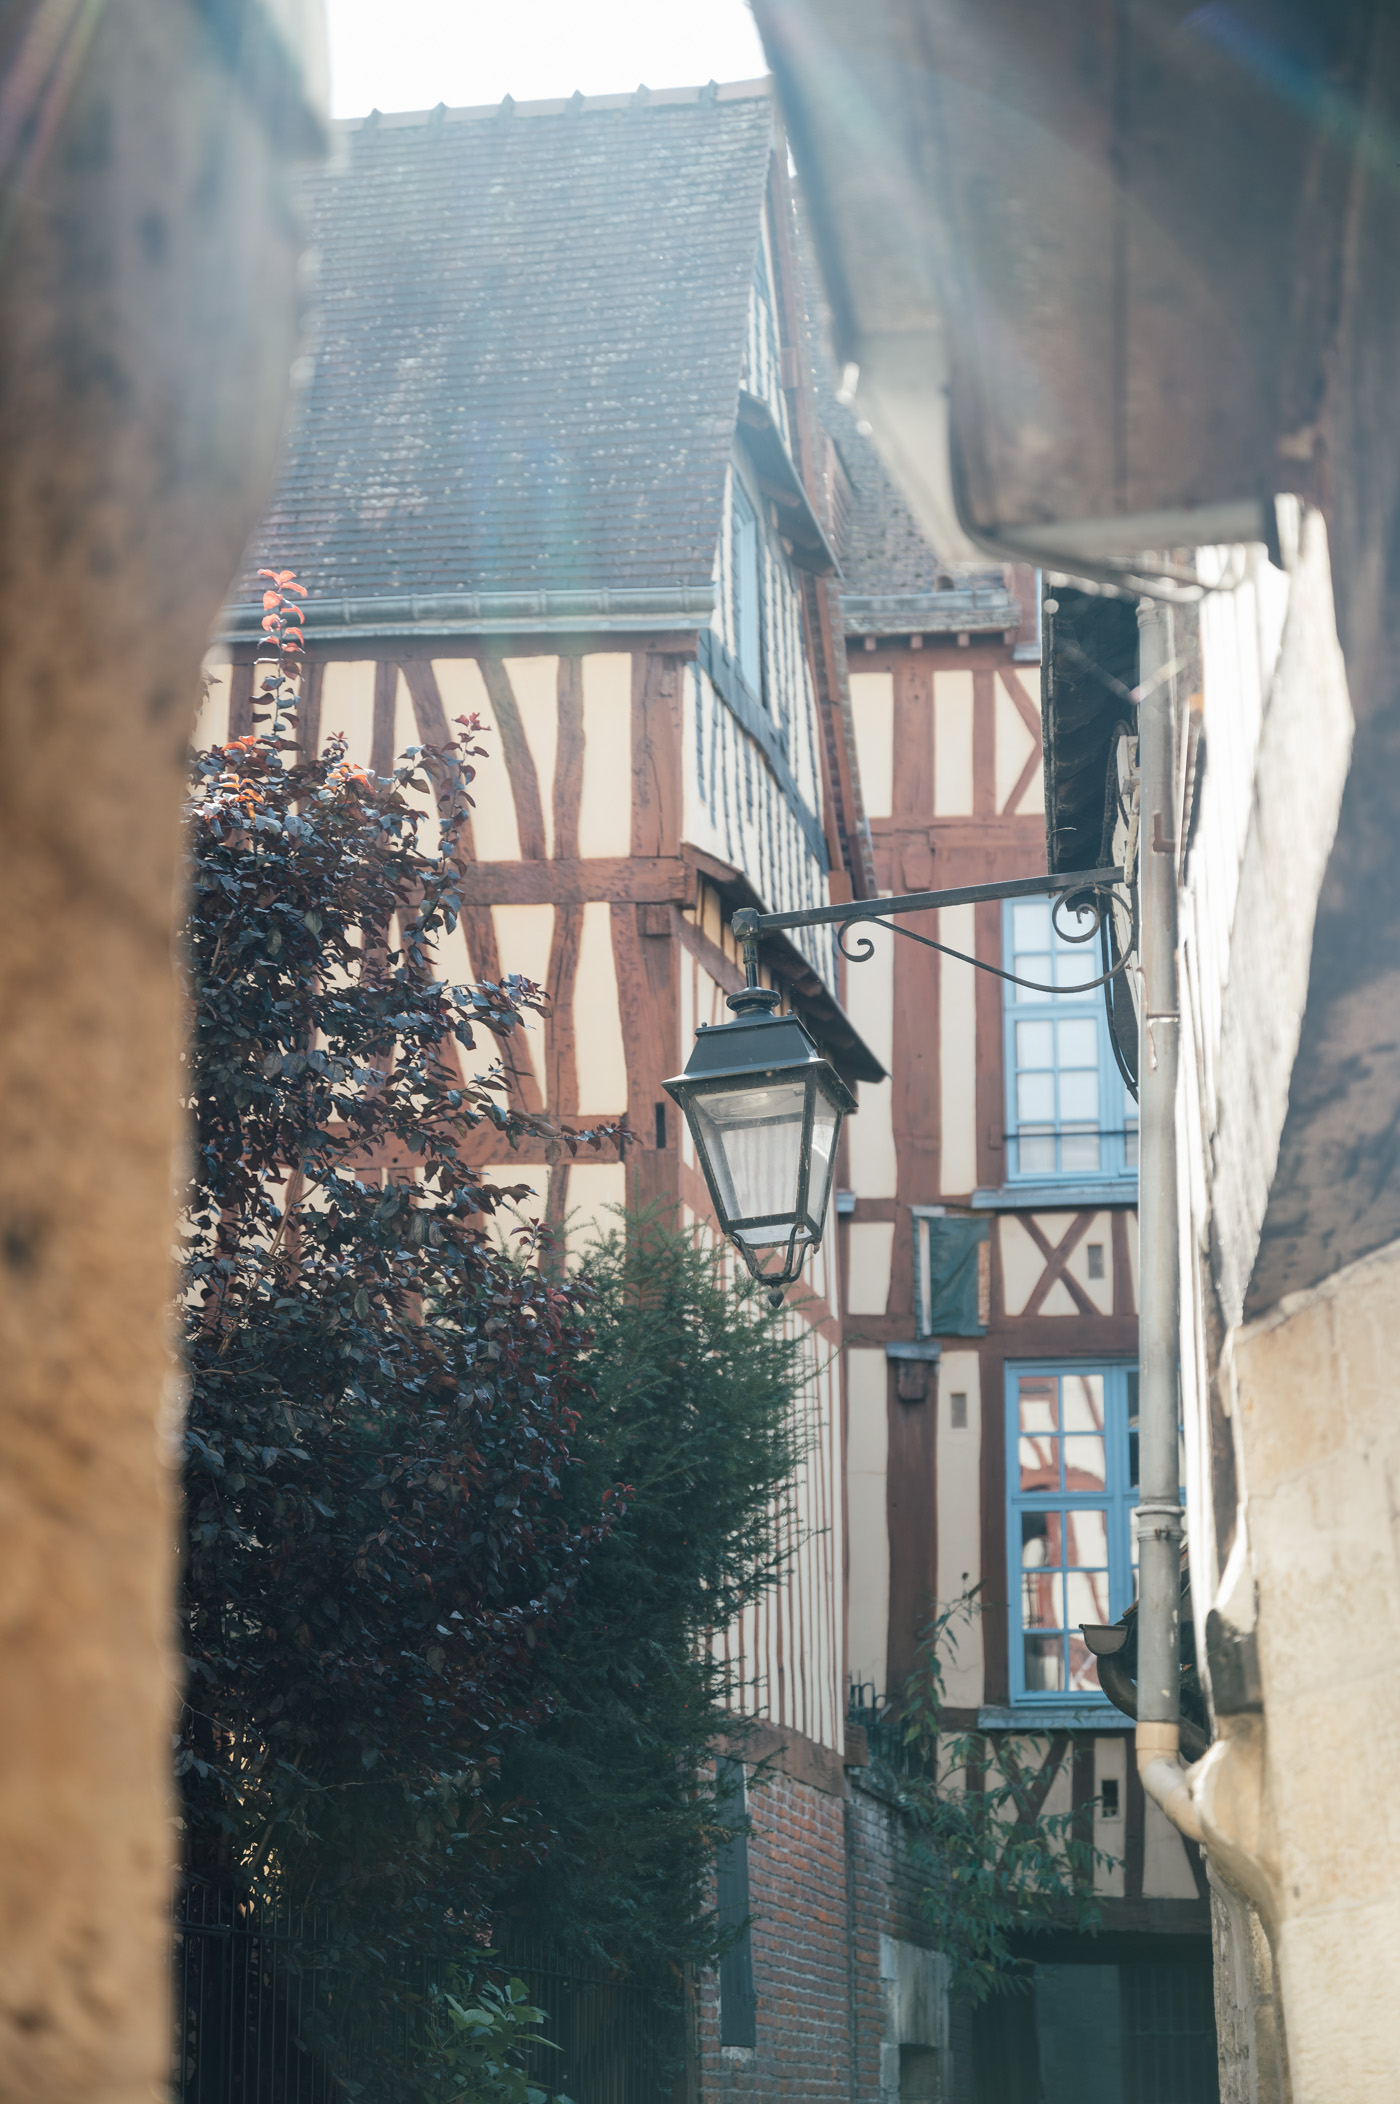 Half-timbered houses in Rouen Normandy